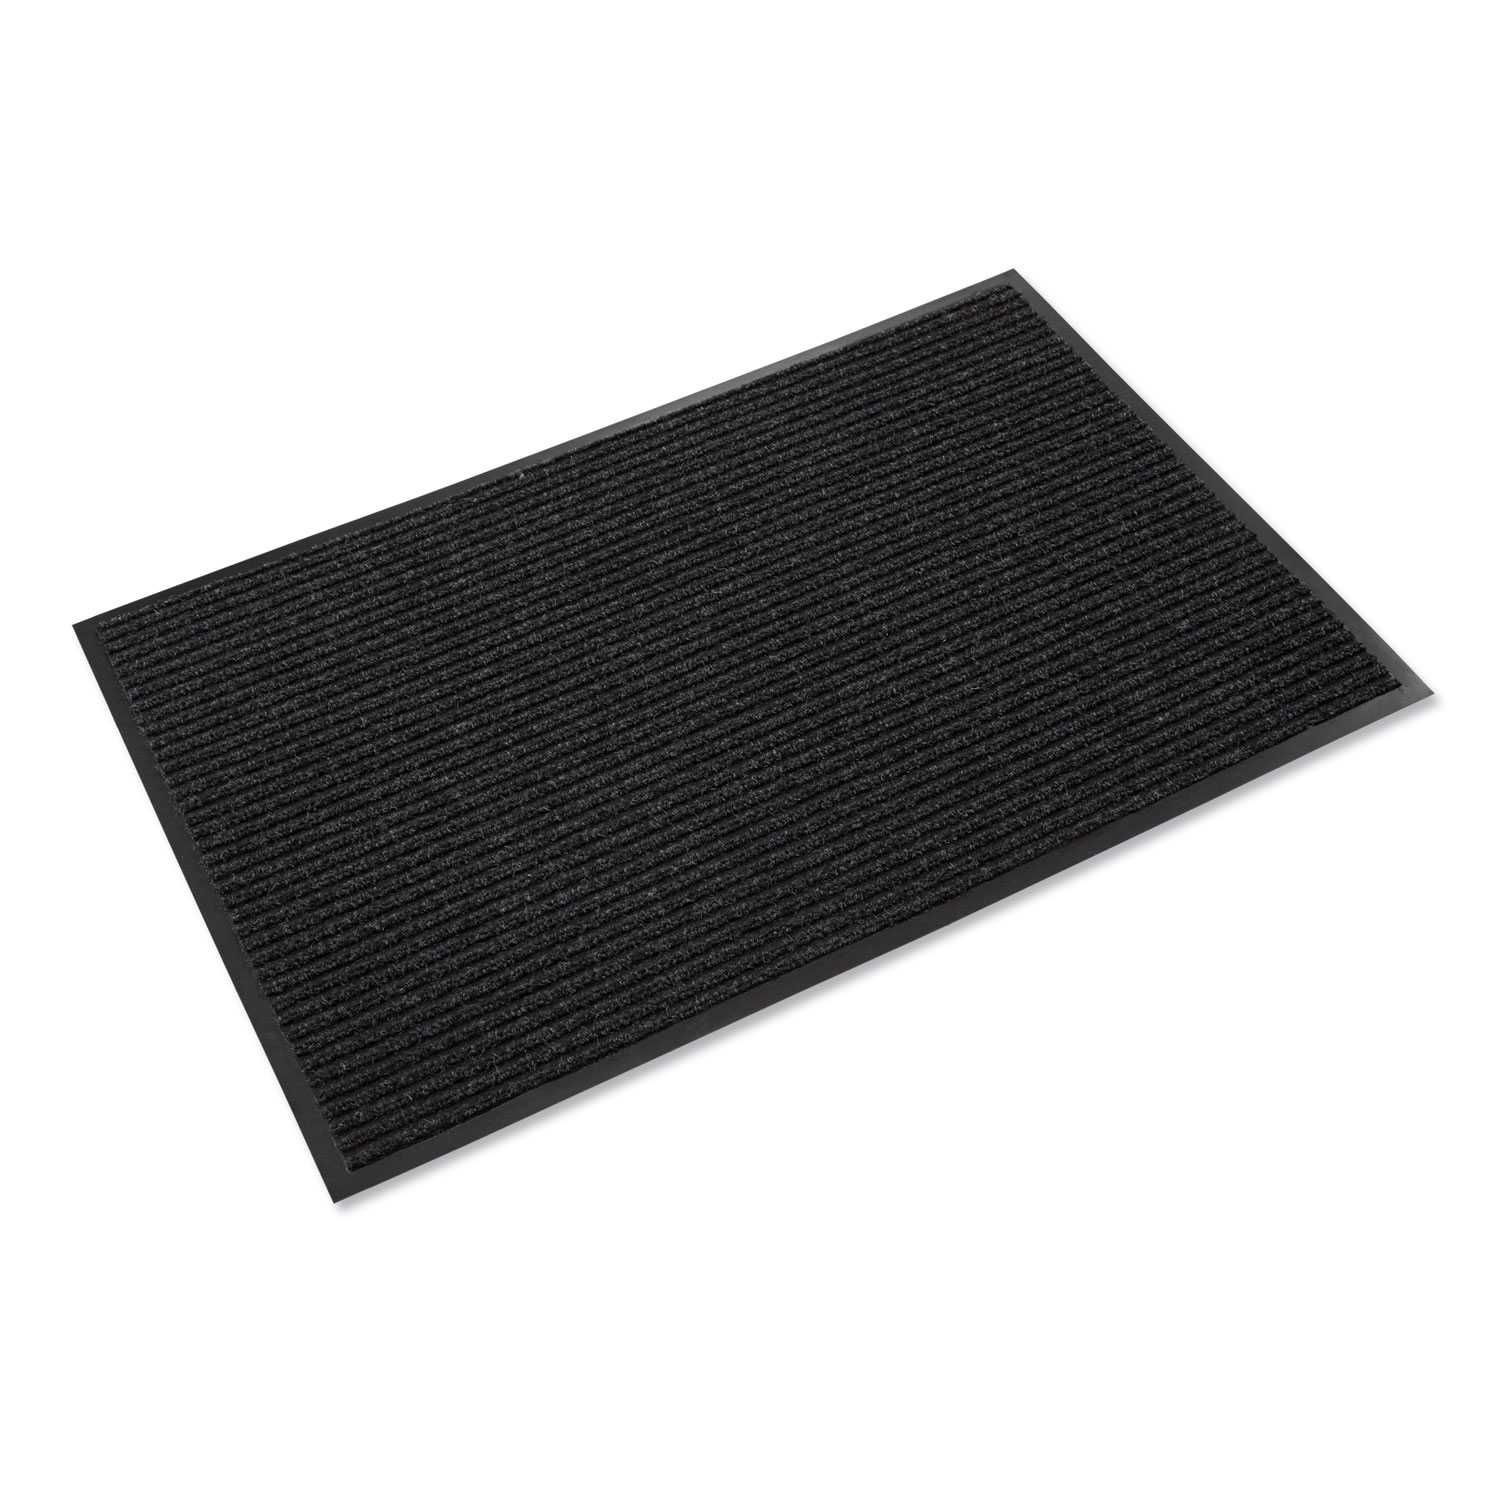 Super Ribbed Mats are Commercial Entrance Mats by American Floor Mats